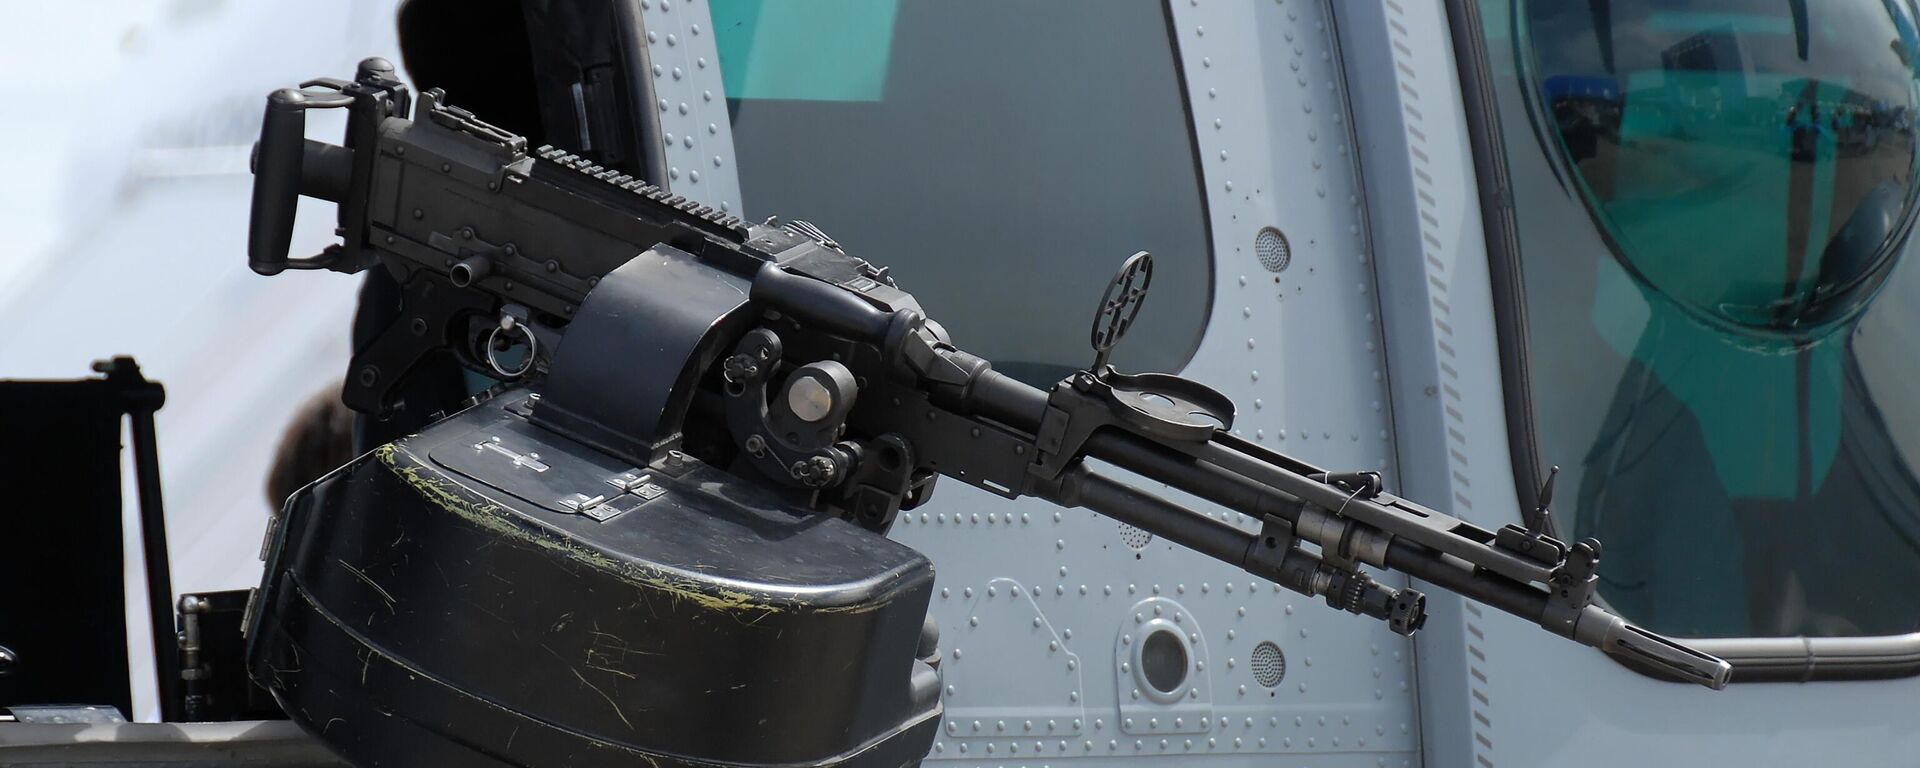  A FN MAG mounted on an Eurocopter Cougar MkII EC-725 at the 2007 International Paris Air Show at the Le Bourget airport. - Sputnik International, 1920, 05.06.2023